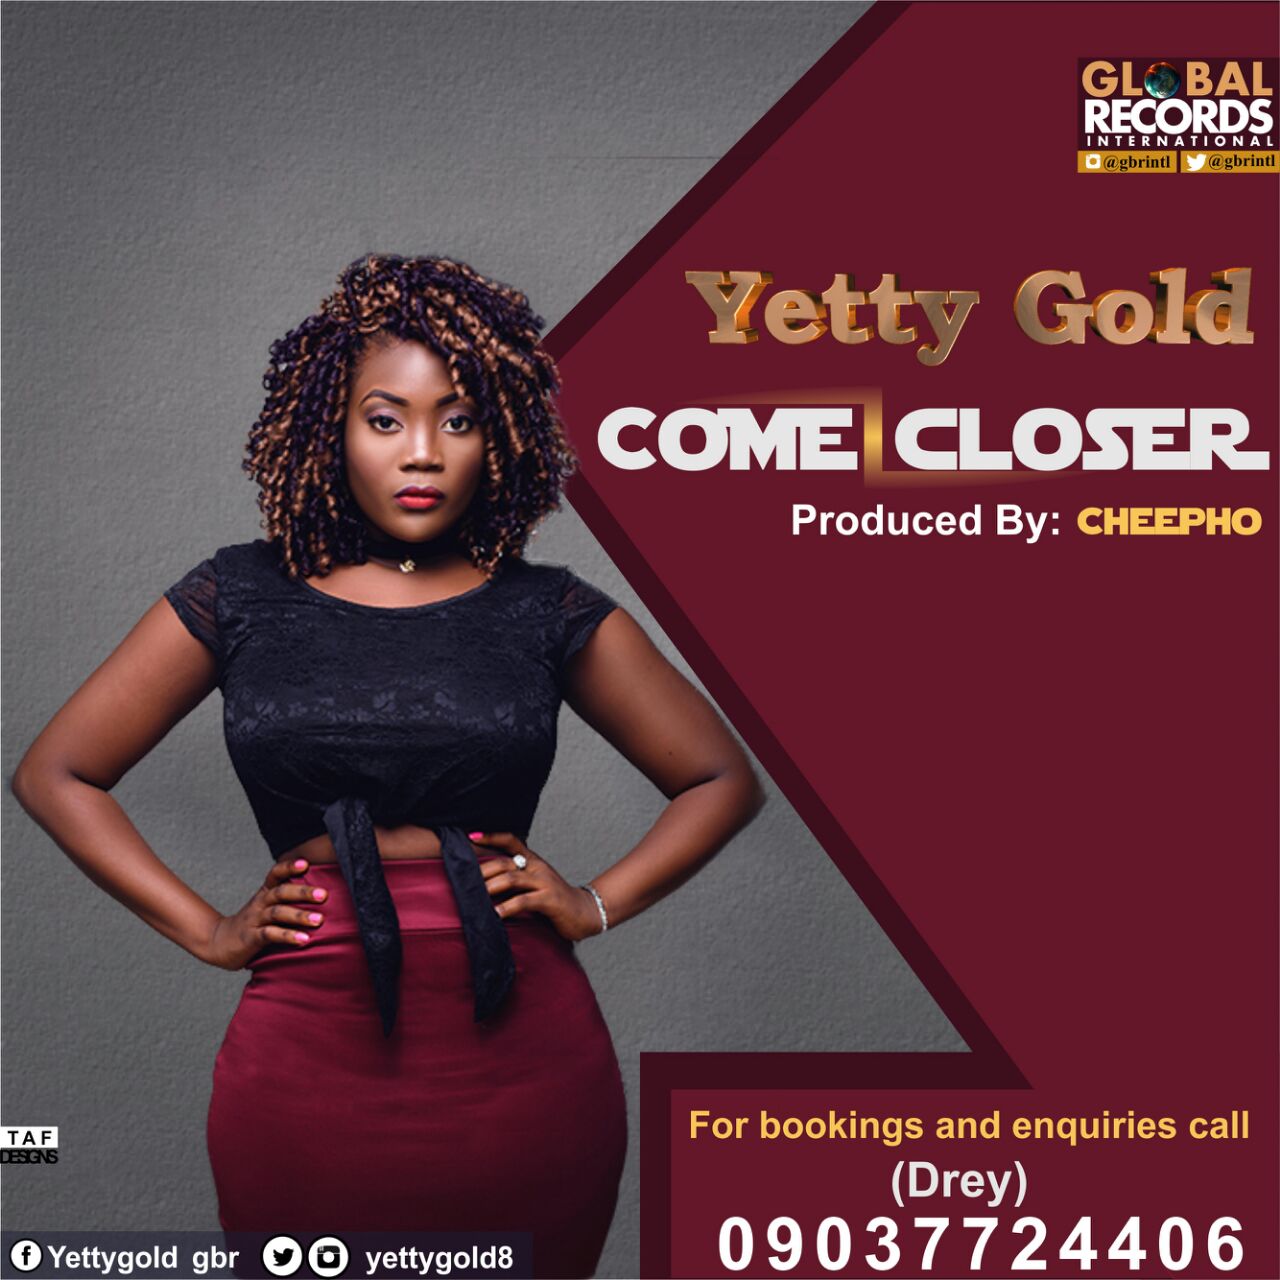 Yetty Gold - Come Closer (prod. Cheepho)